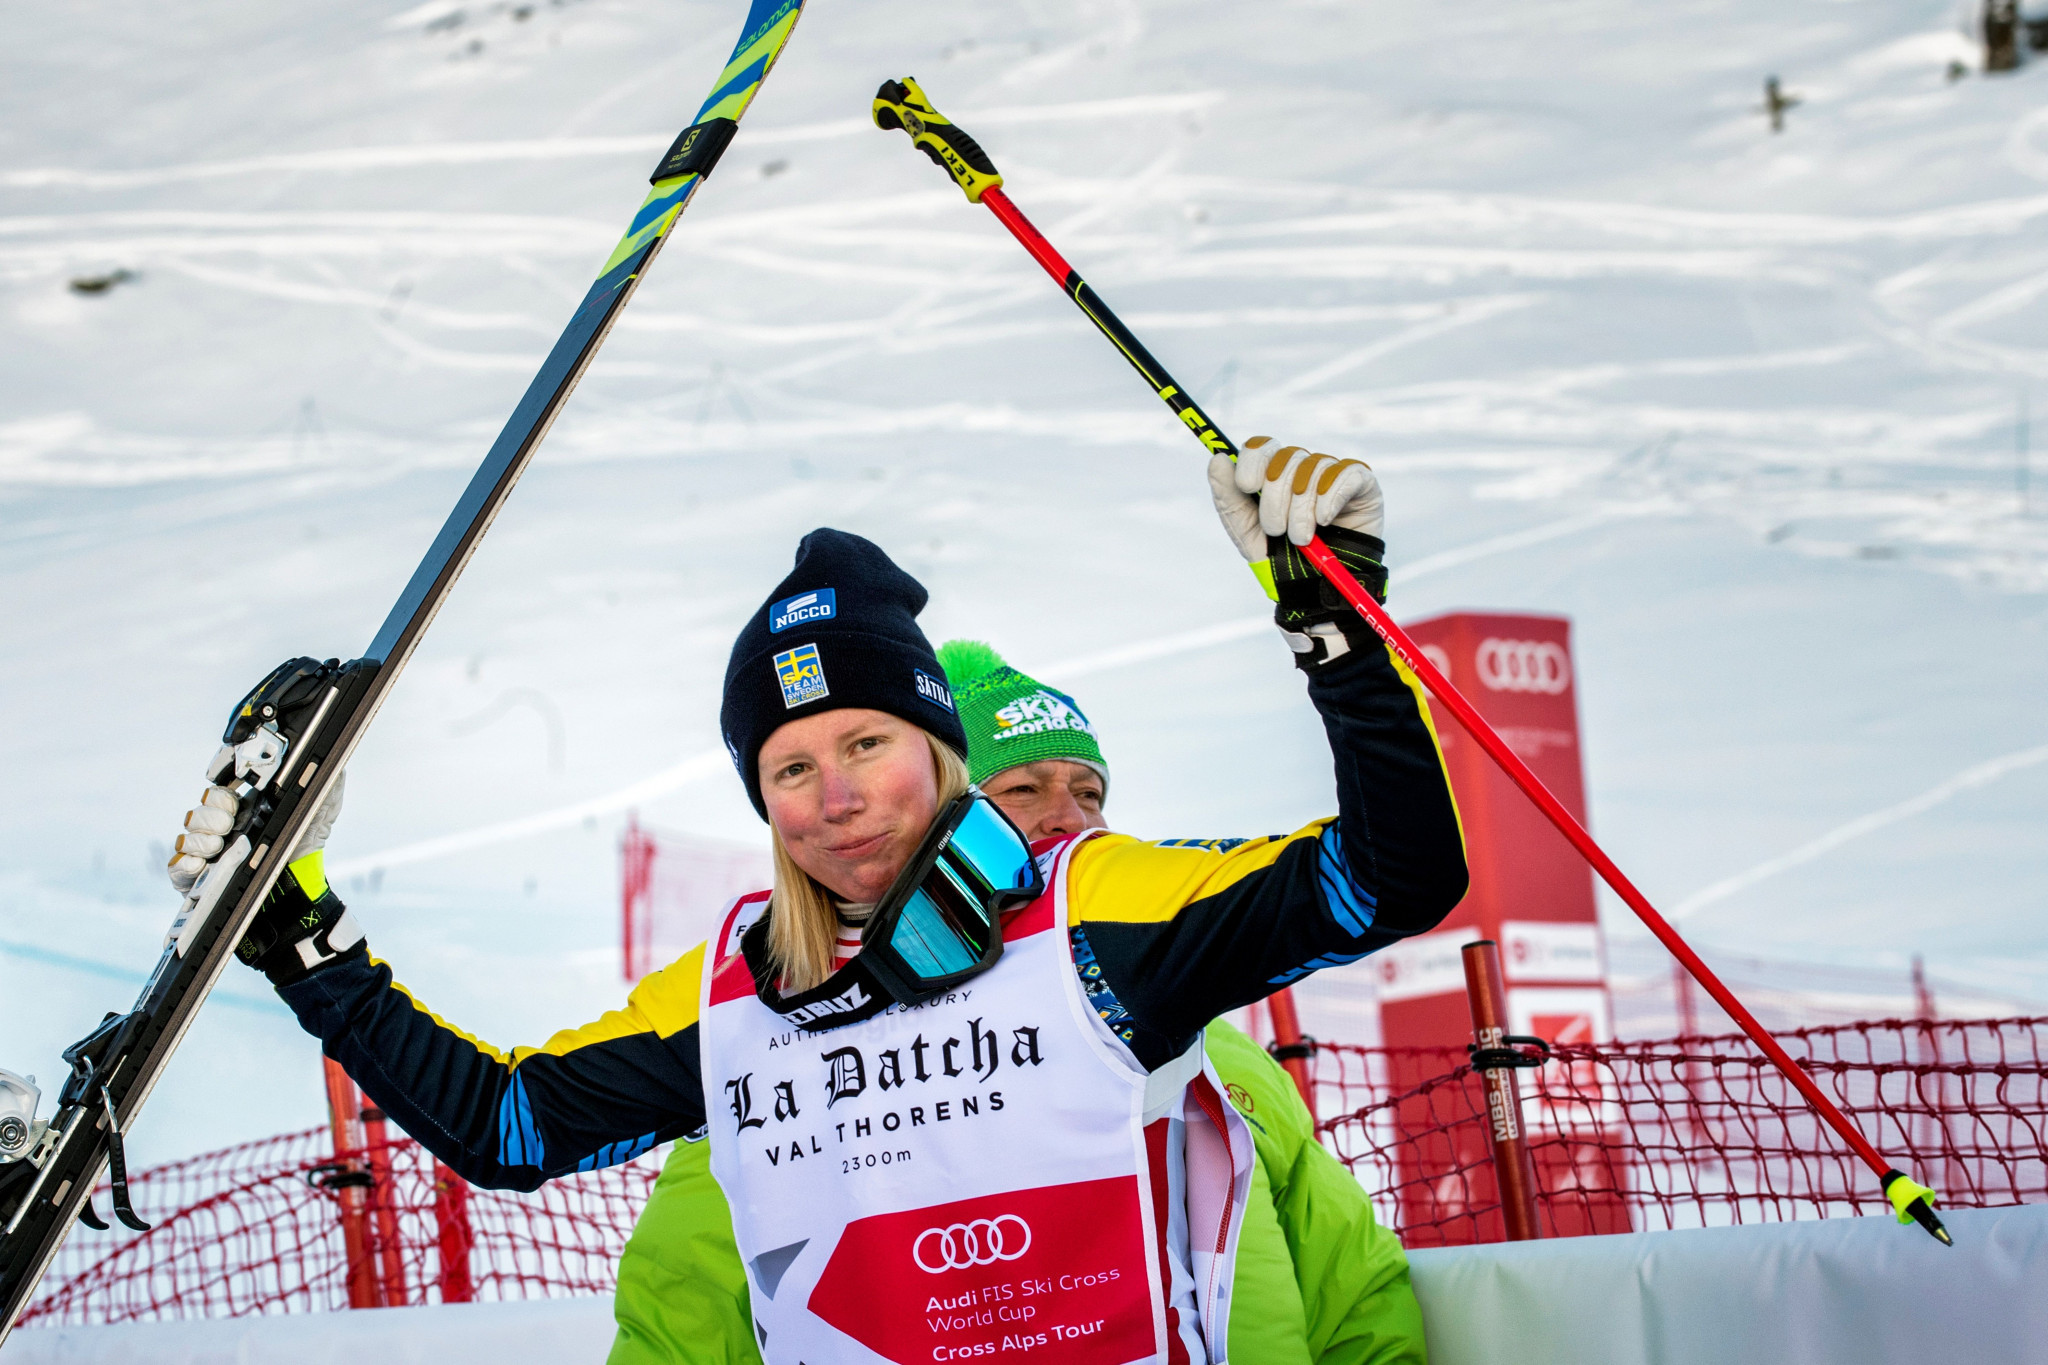 Competition favourite Näslund claims ski cross gold on home snow